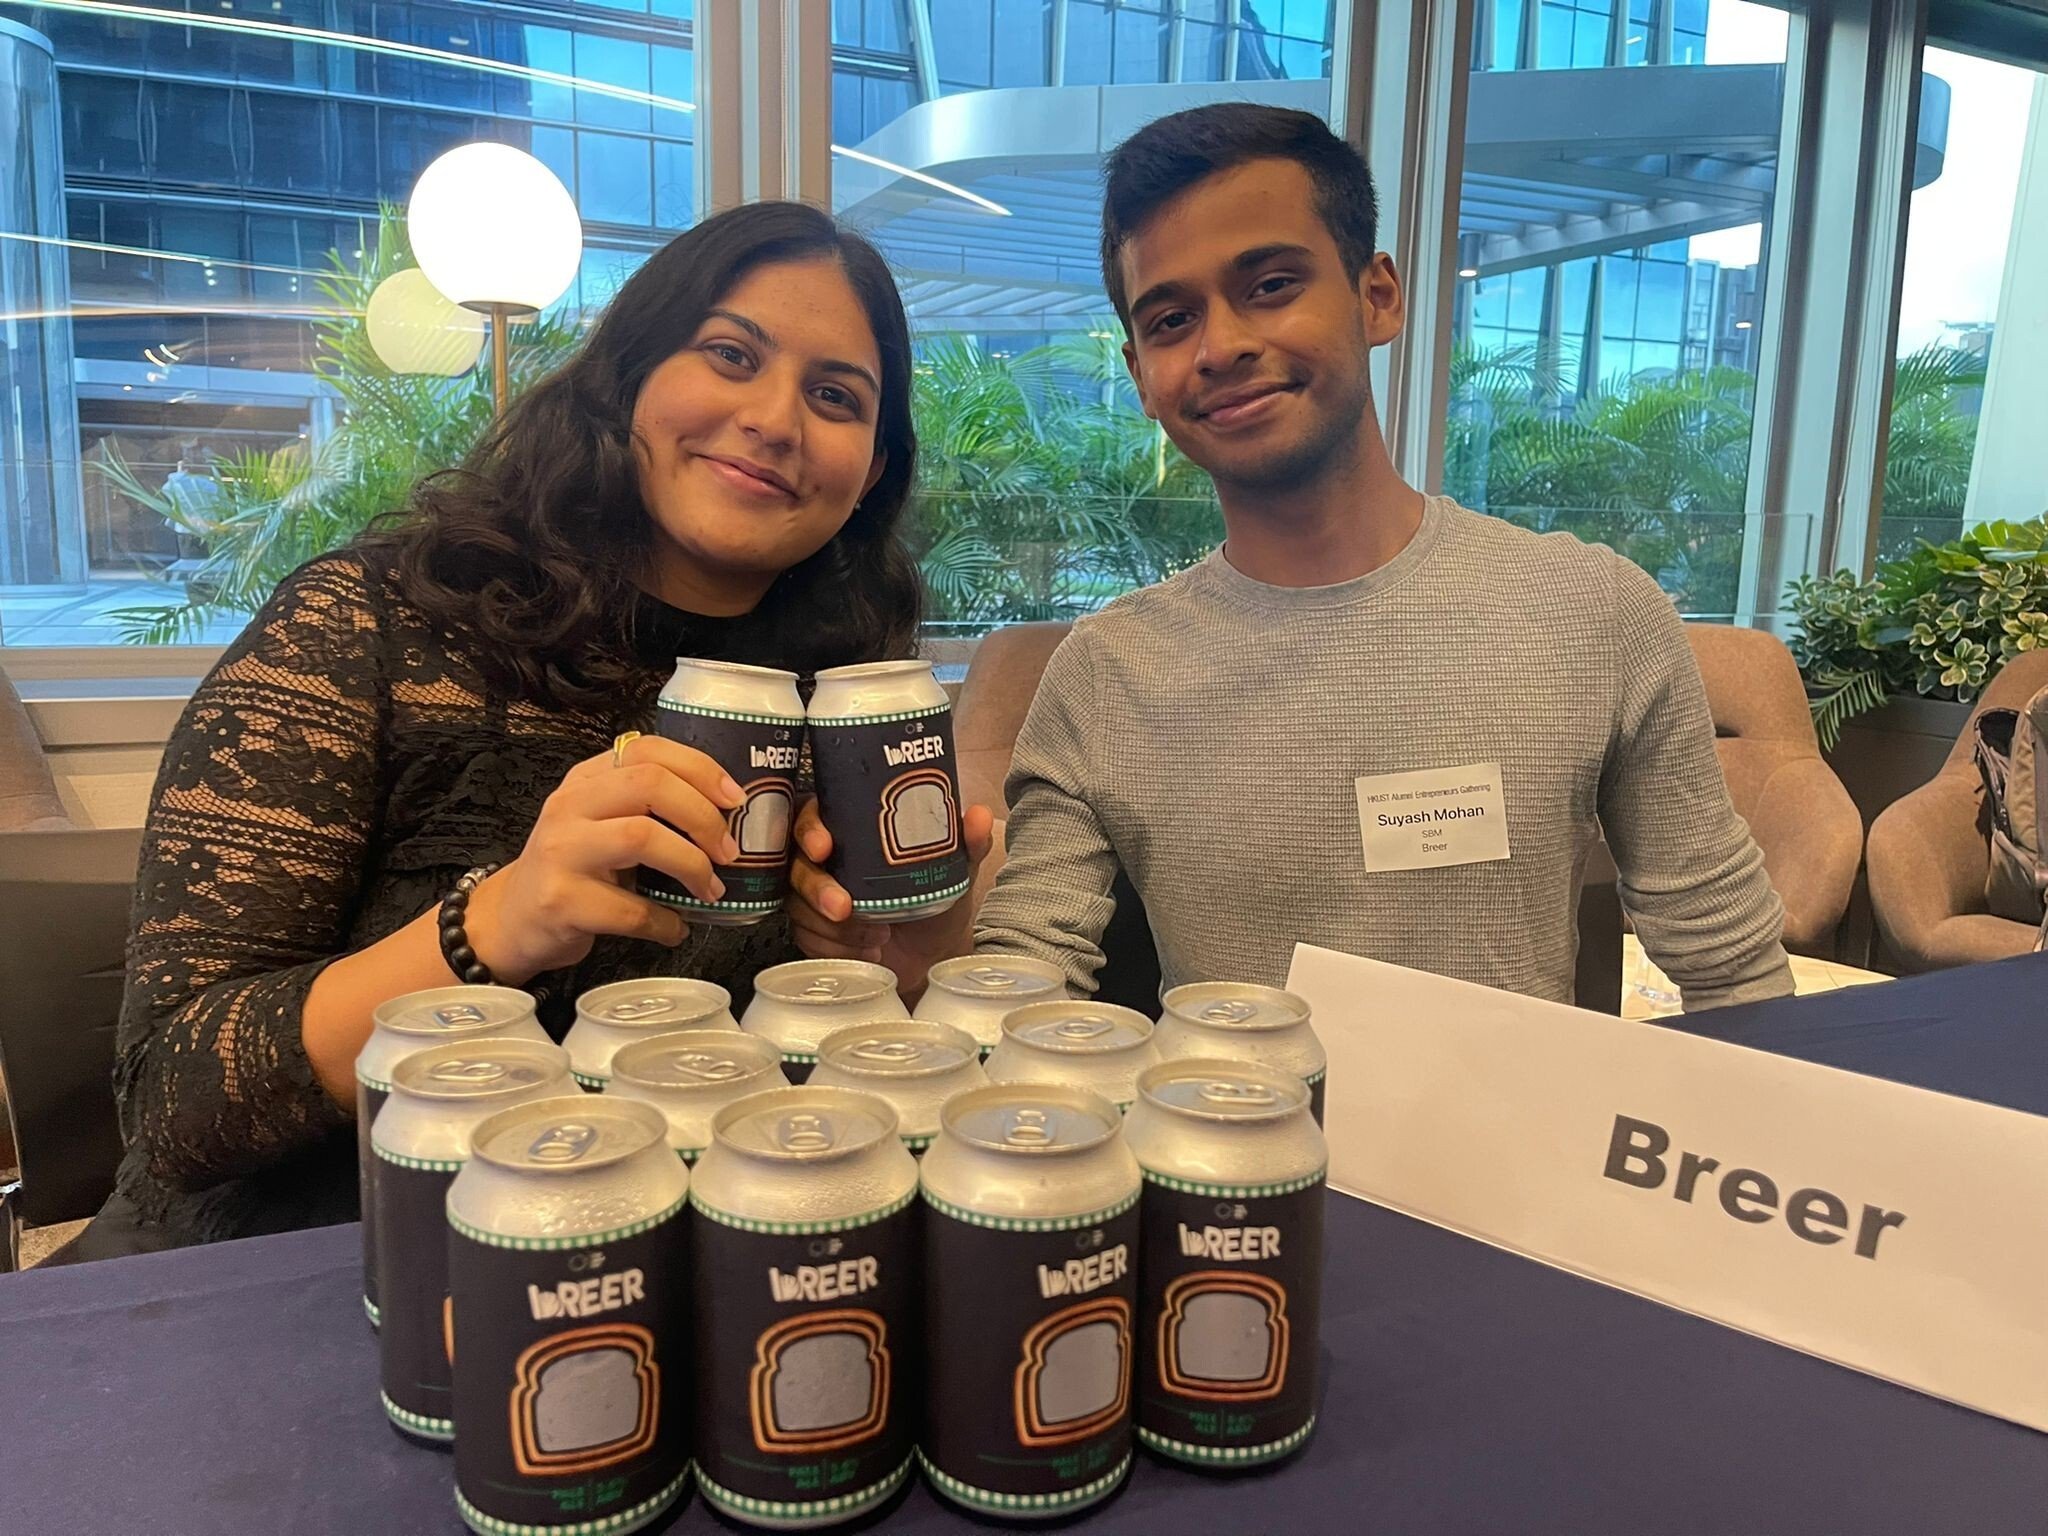 Anushka Purohit (left) and Suyash Mohan are two of the four founders of Breer, a start-up that creates beer from leftover bread. It was one of the top winners at Hong Kong’s first City I&T Grand Challenge held in October.